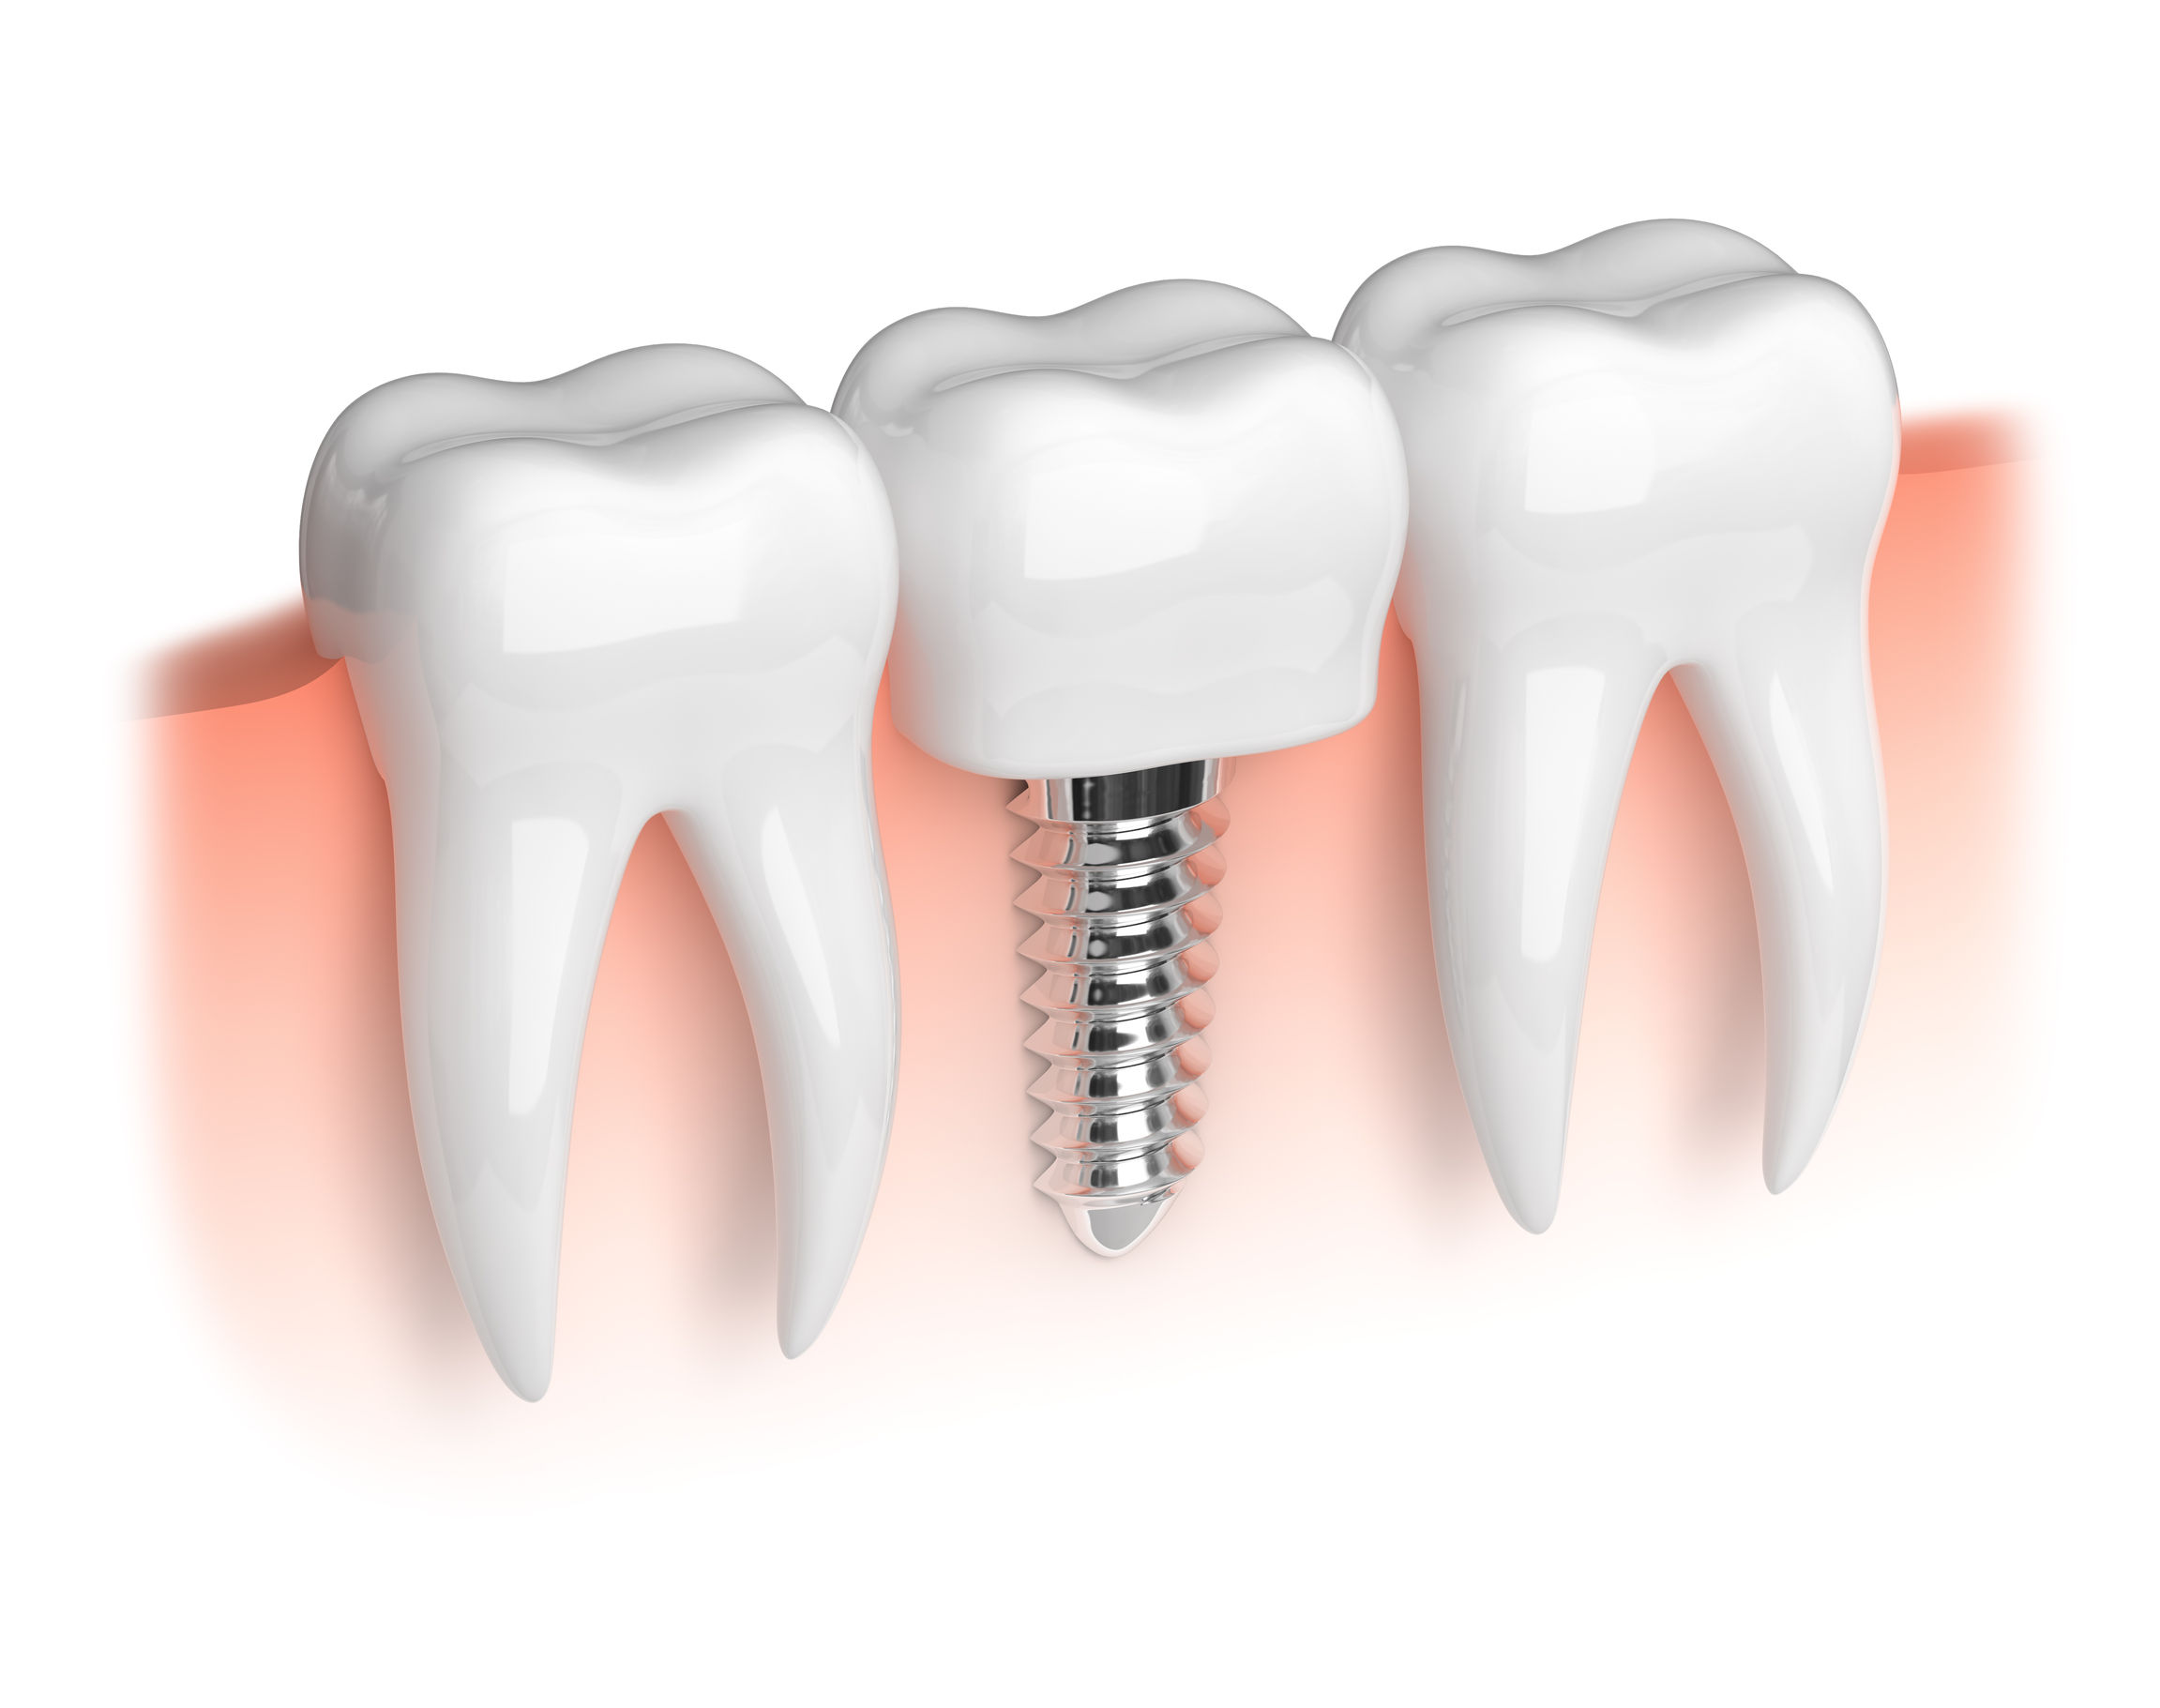 Where can I find 94539 dental implants?